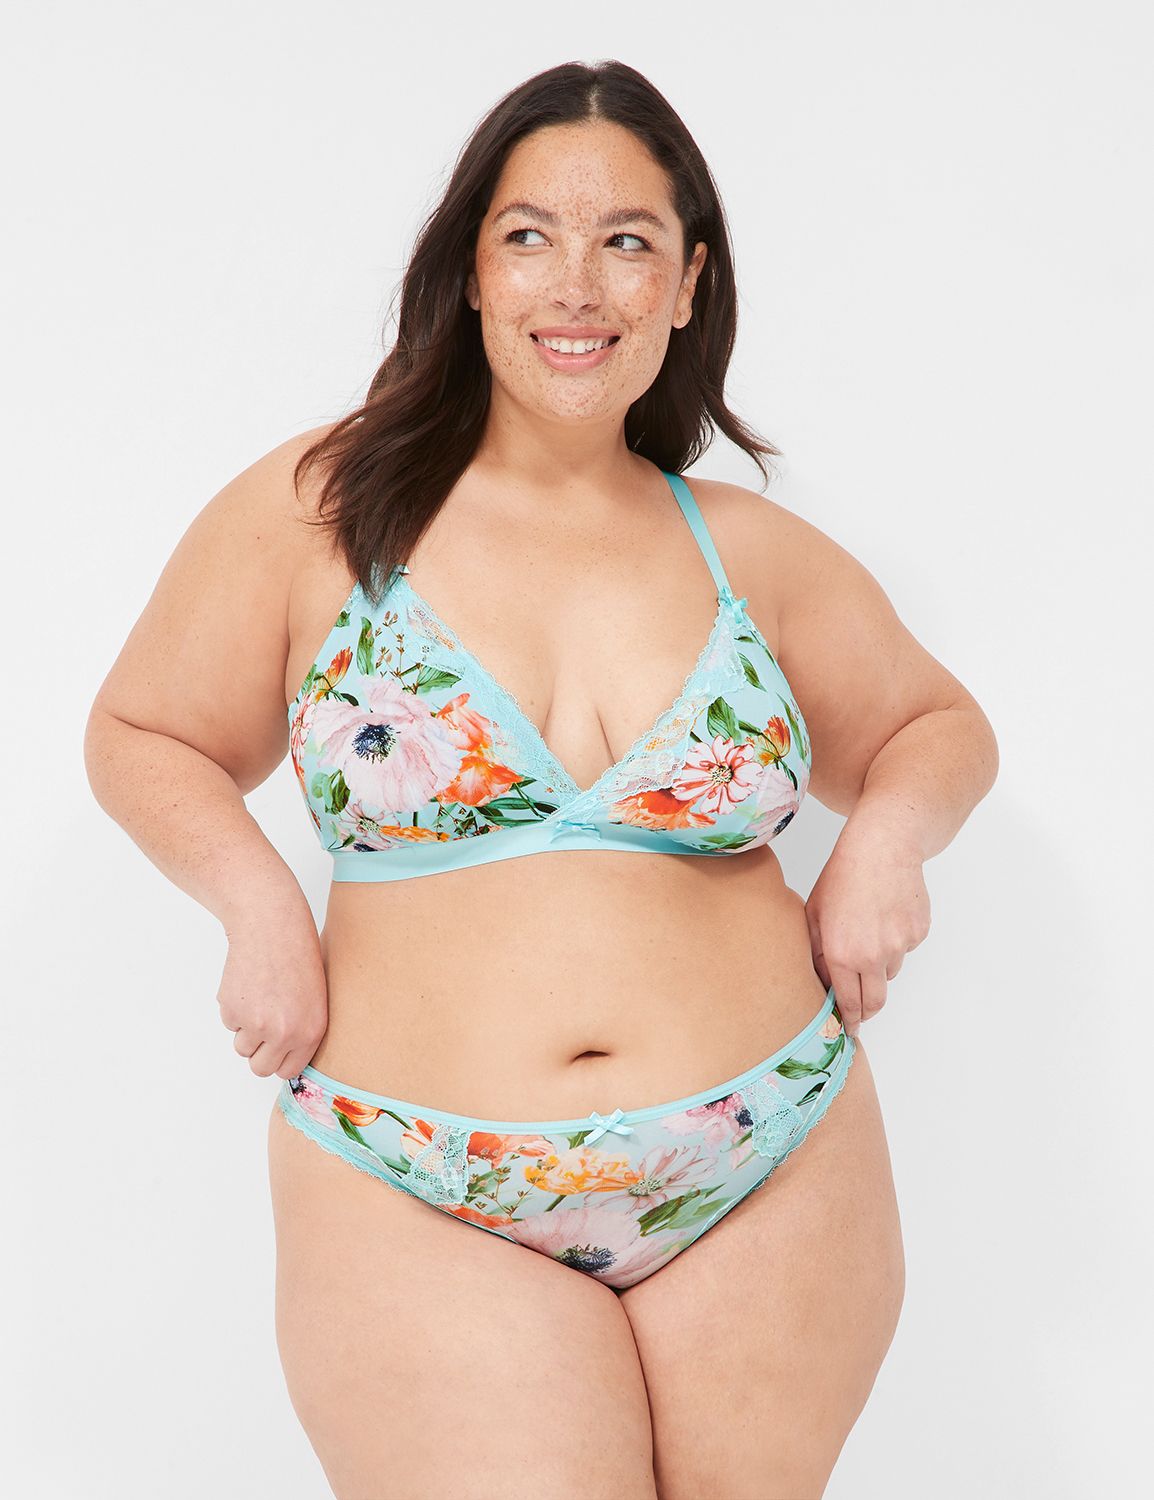 Introducing Hestia: our game-changing wireless bra for plus-size